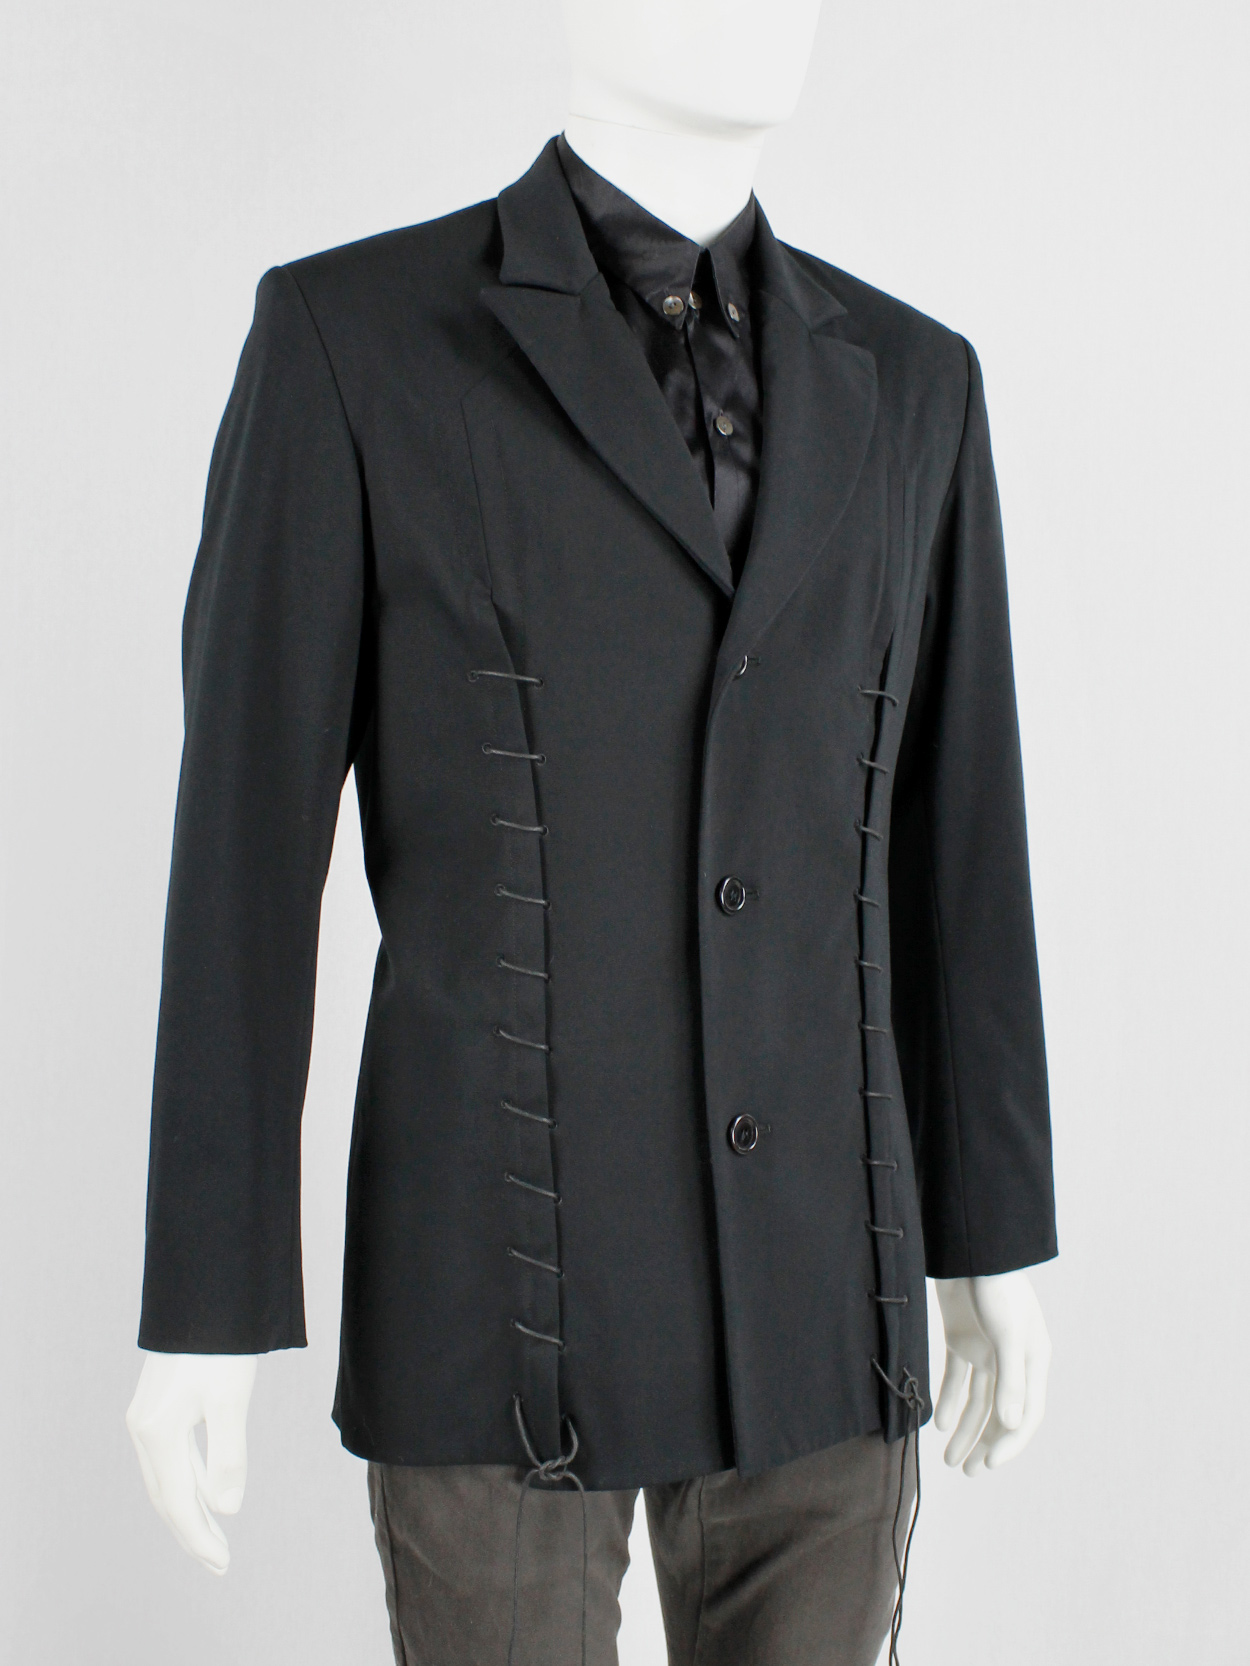 Lieve Van Gorp black tailored blazer with two laced up front slits ...